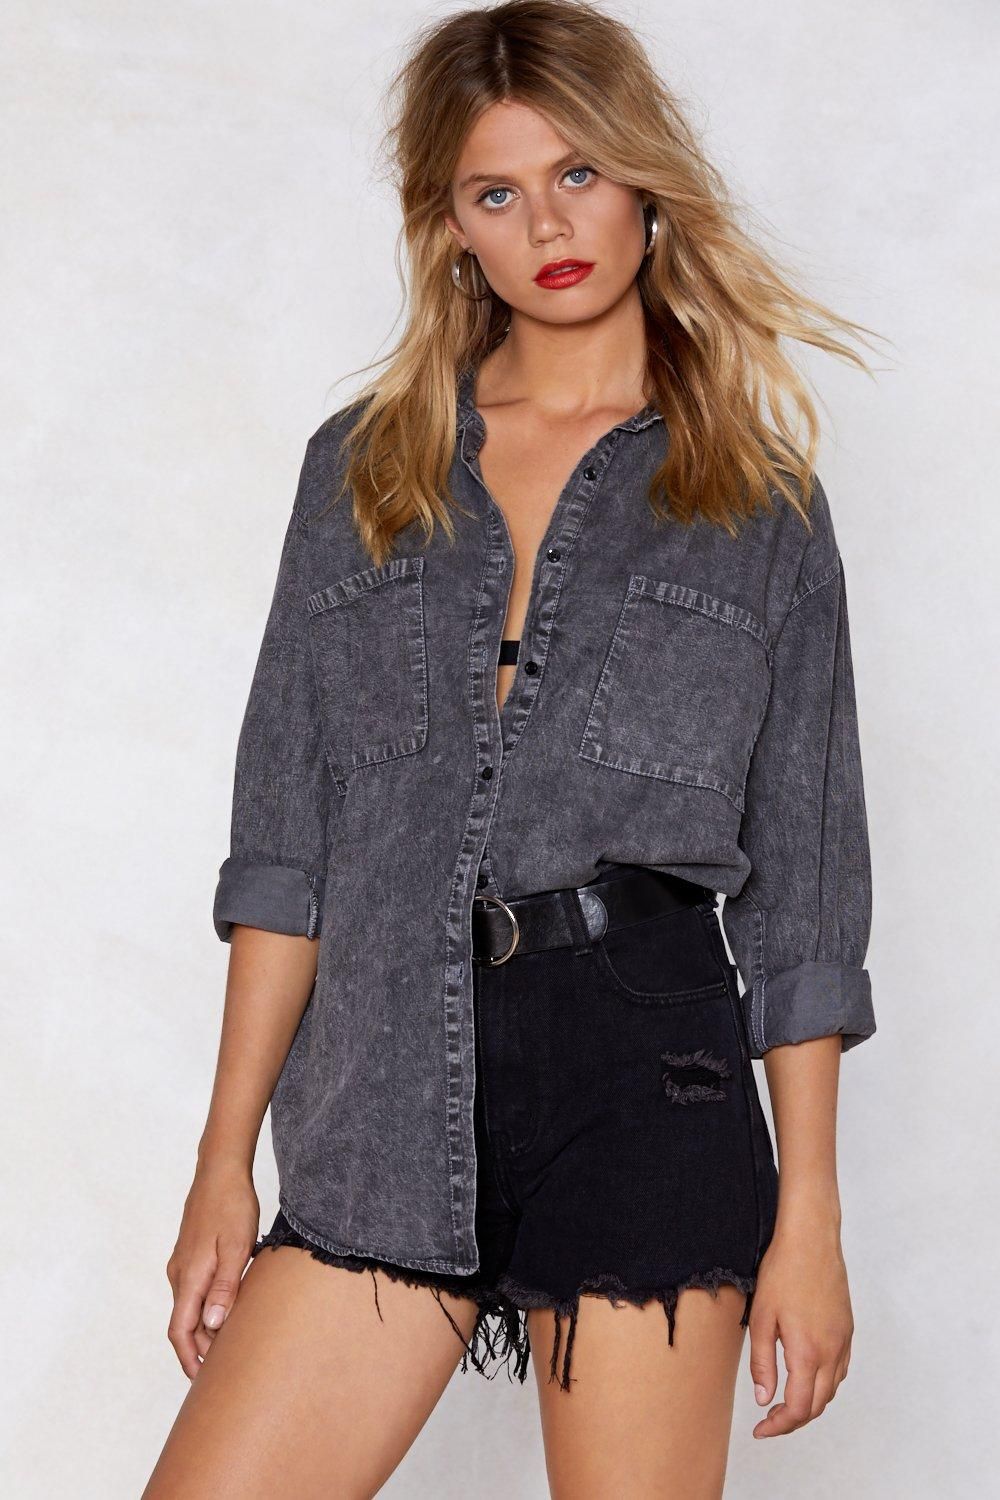 That Doesn't Wash With Me Oversized Shirt | NastyGal (US & CA)